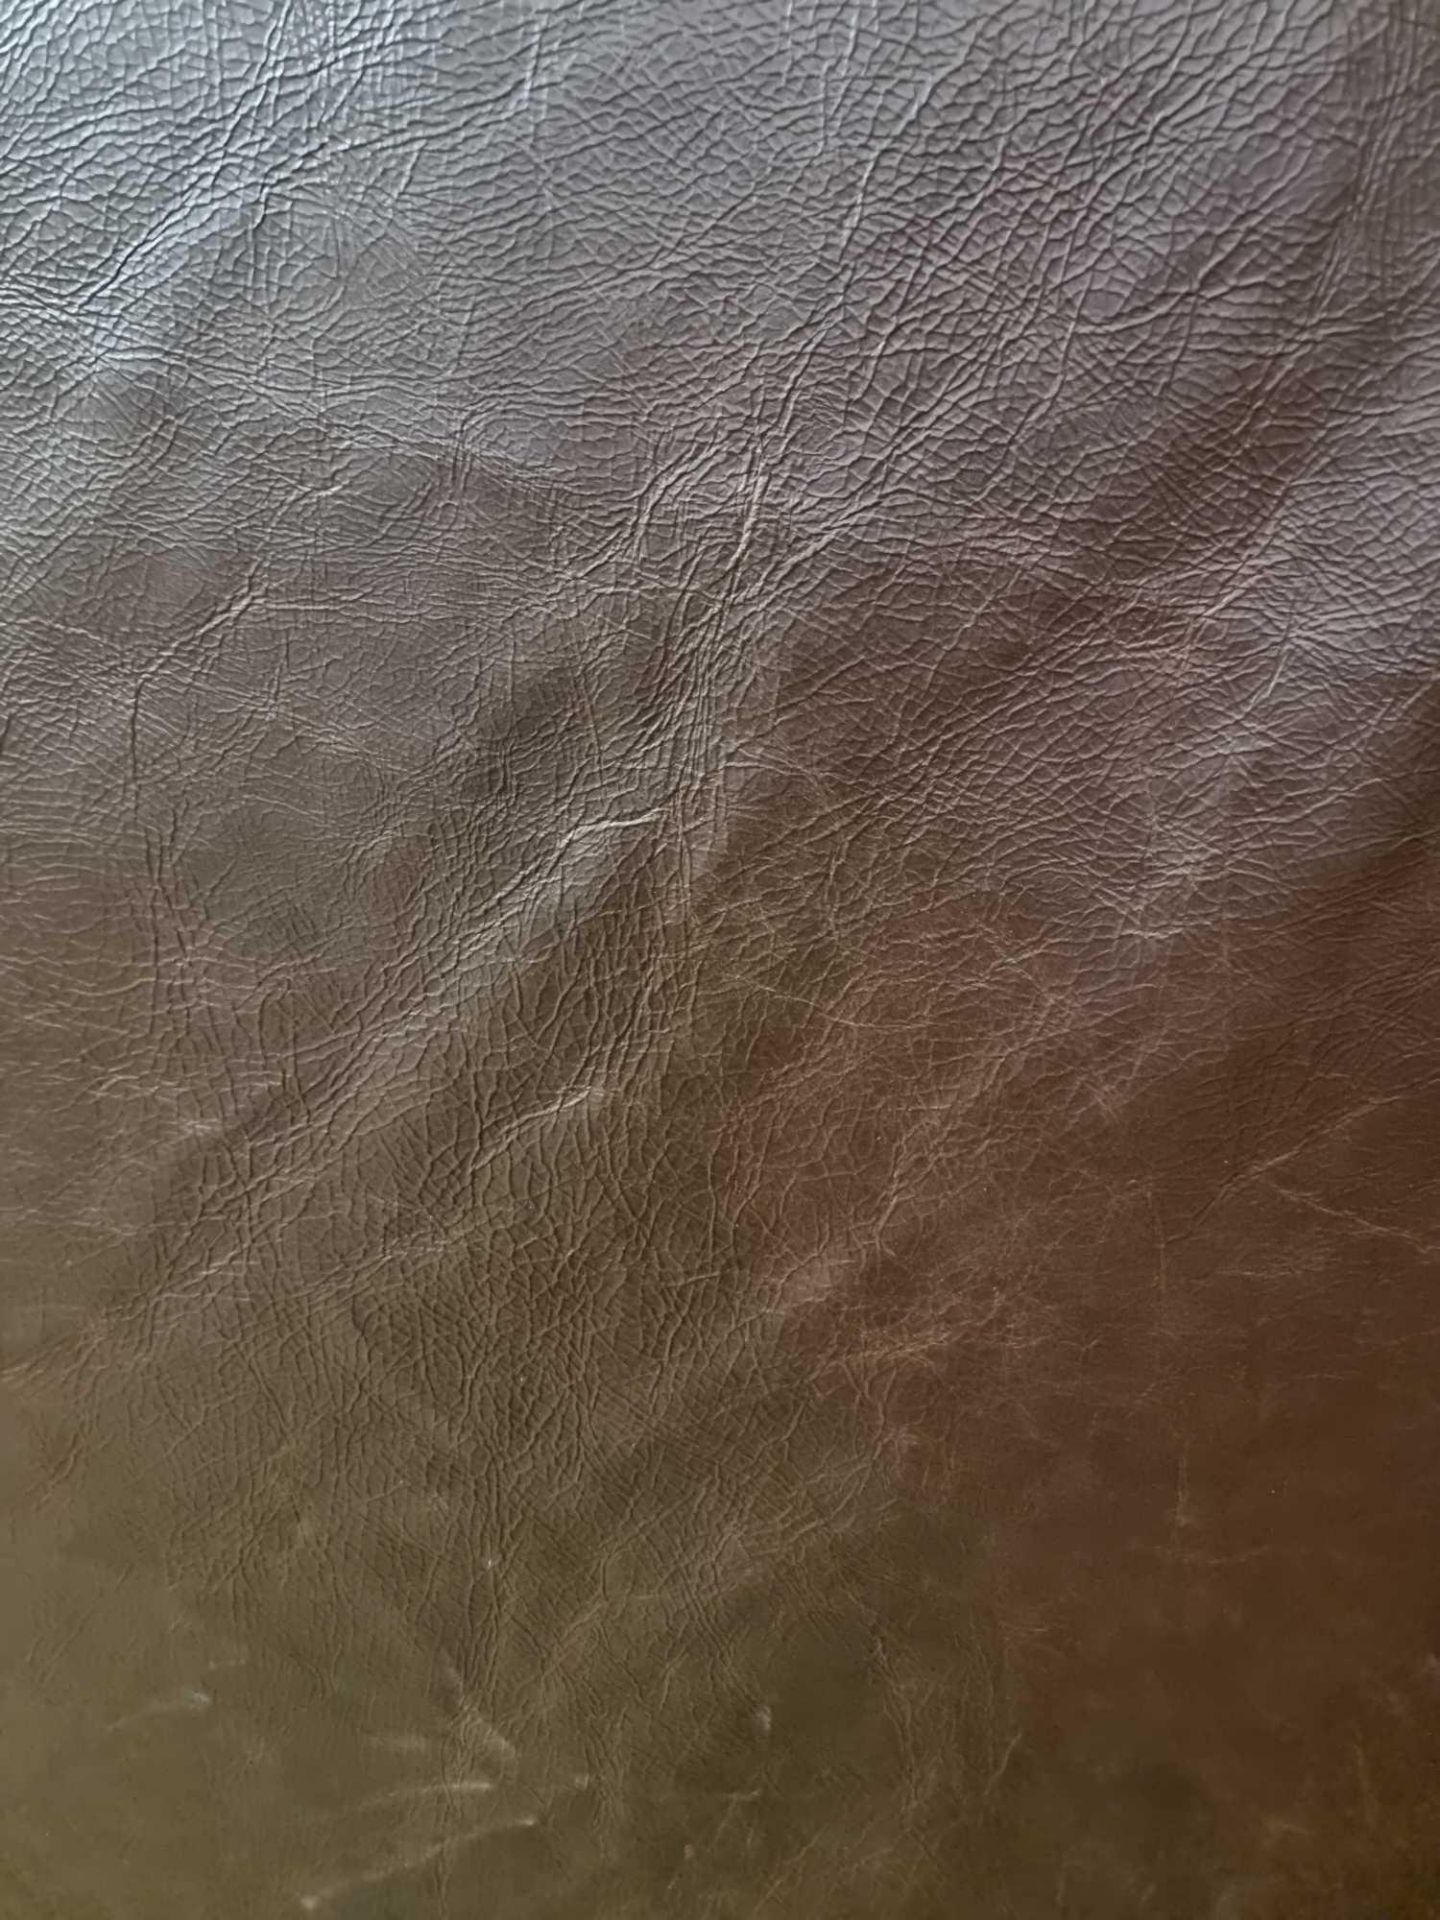 Mastrotto Hudson Chocolate Leather Hide approximately 3 52M2 2 2 x 1 6cm ( Hide No,28) - Image 2 of 2